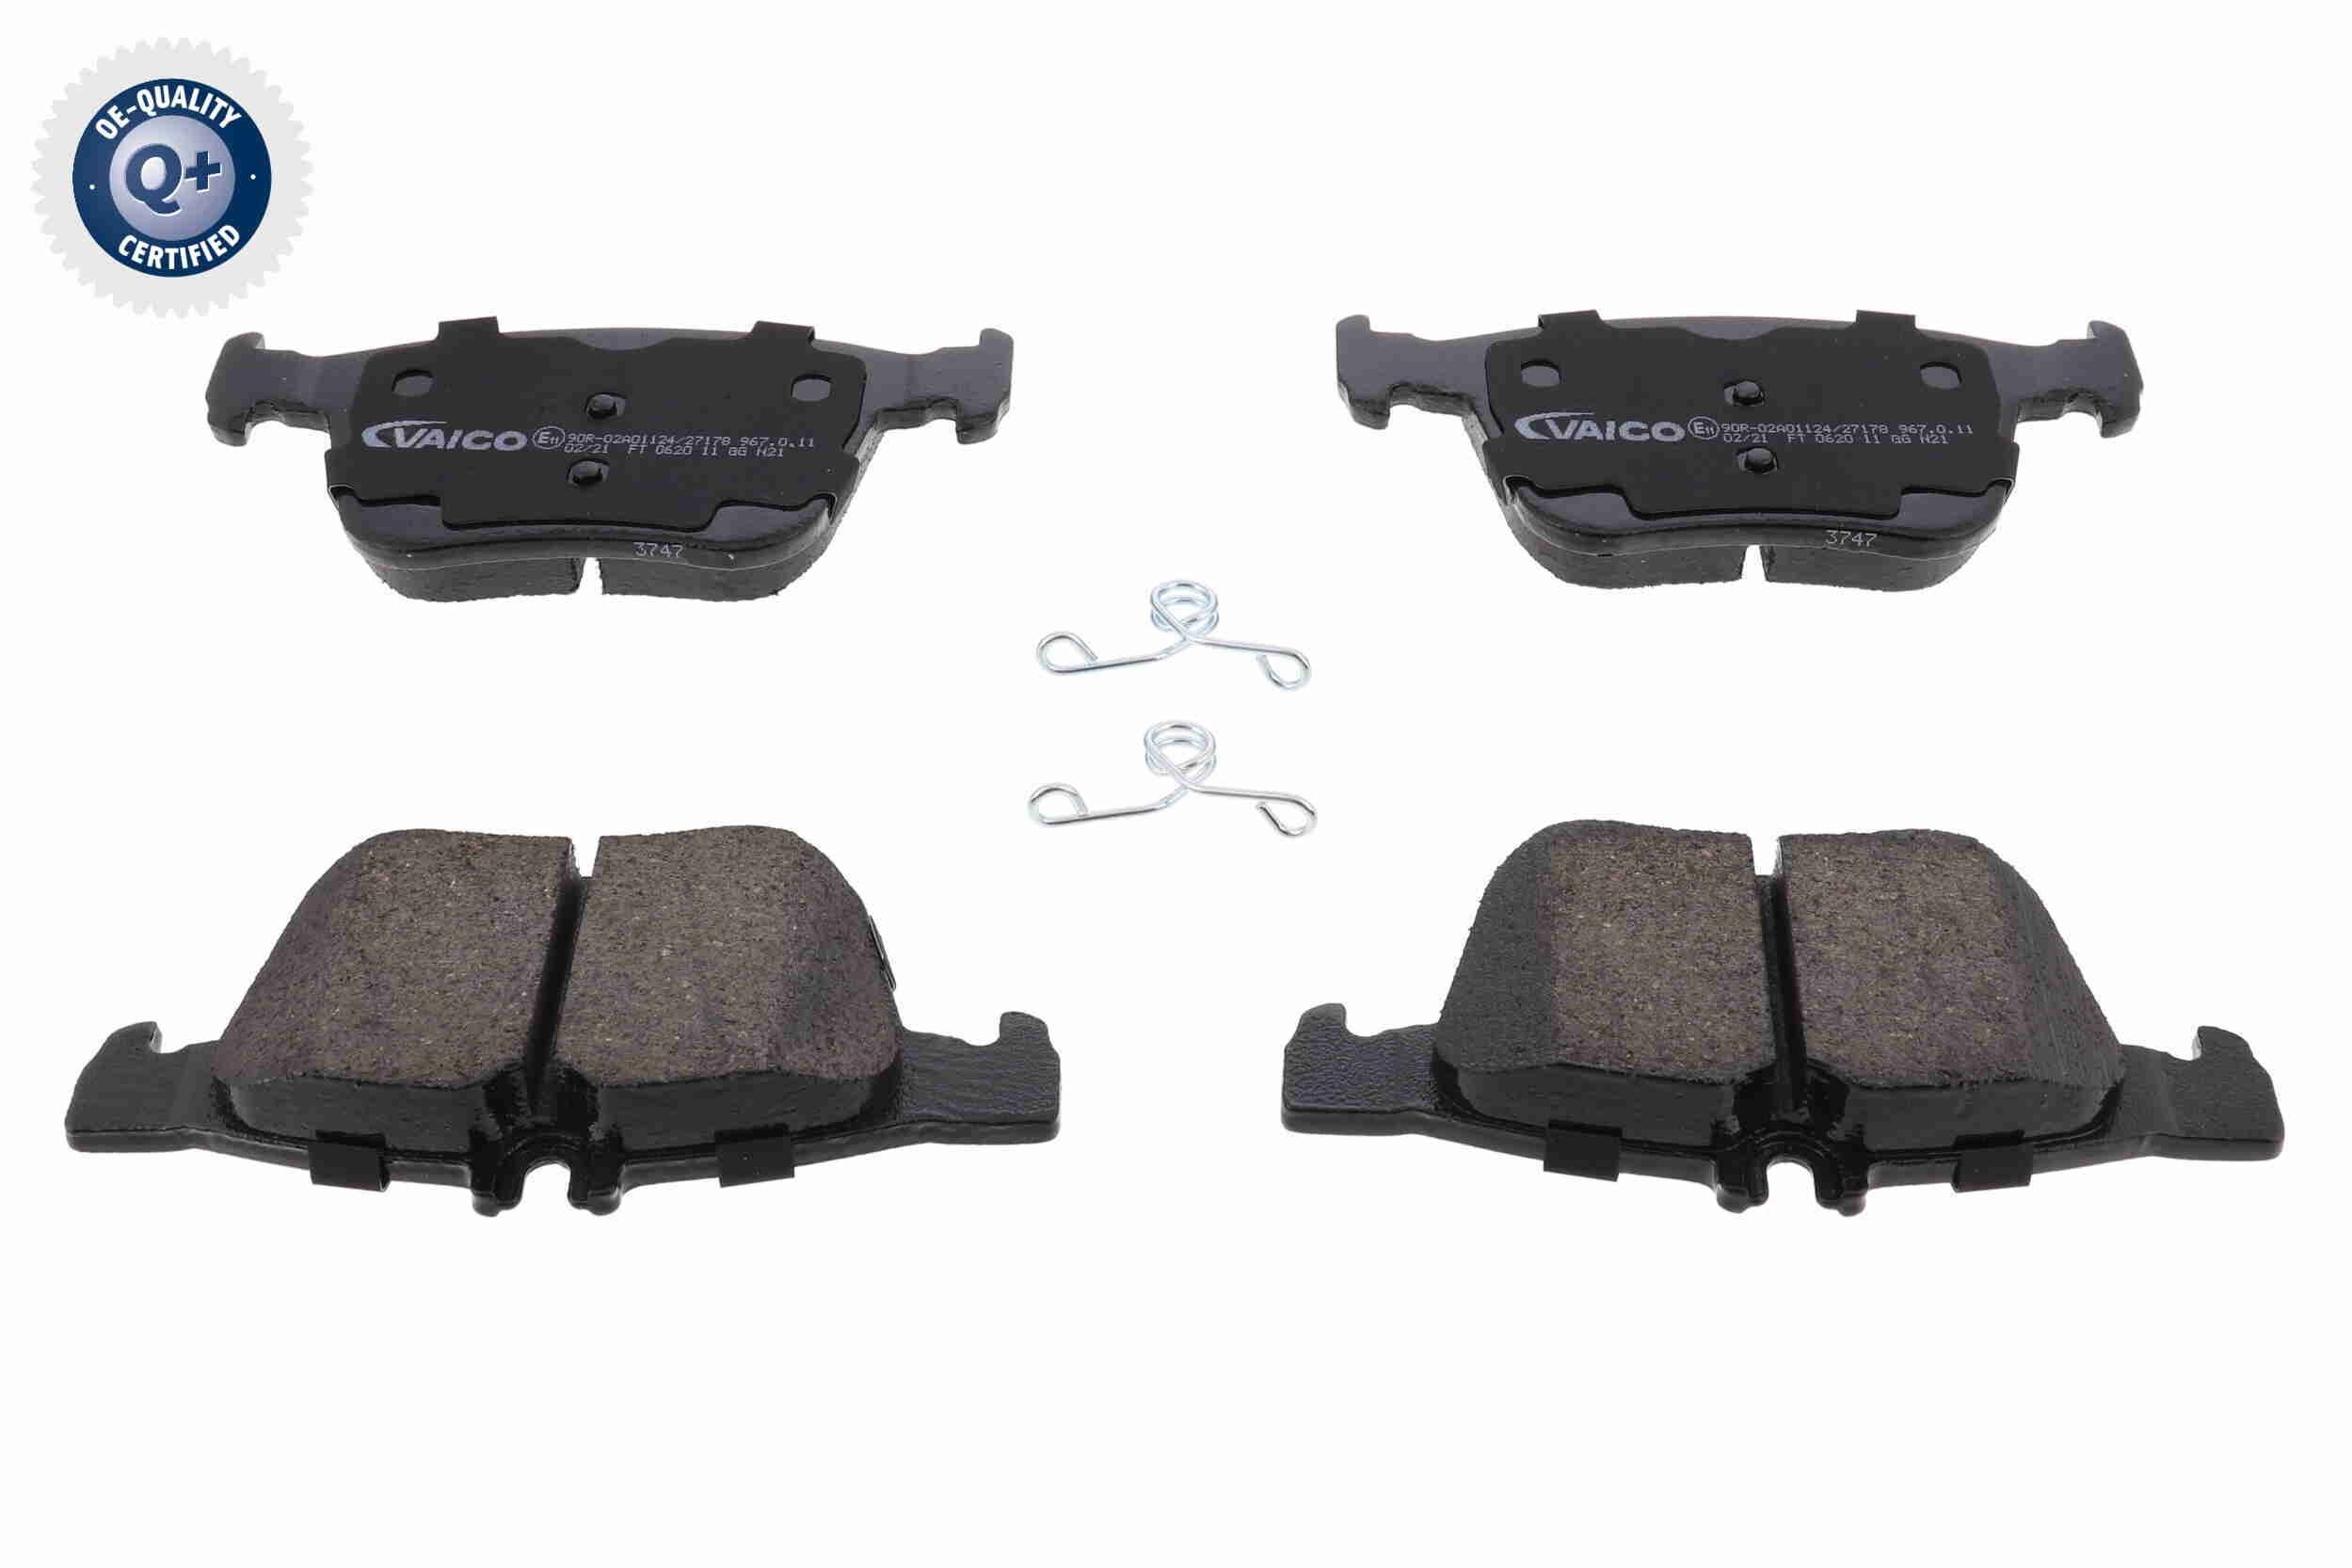 V10-1023 VAICO Brake pad set IVECO Q+, original equipment manufacturer quality, Rear Axle, excl. wear warning contact